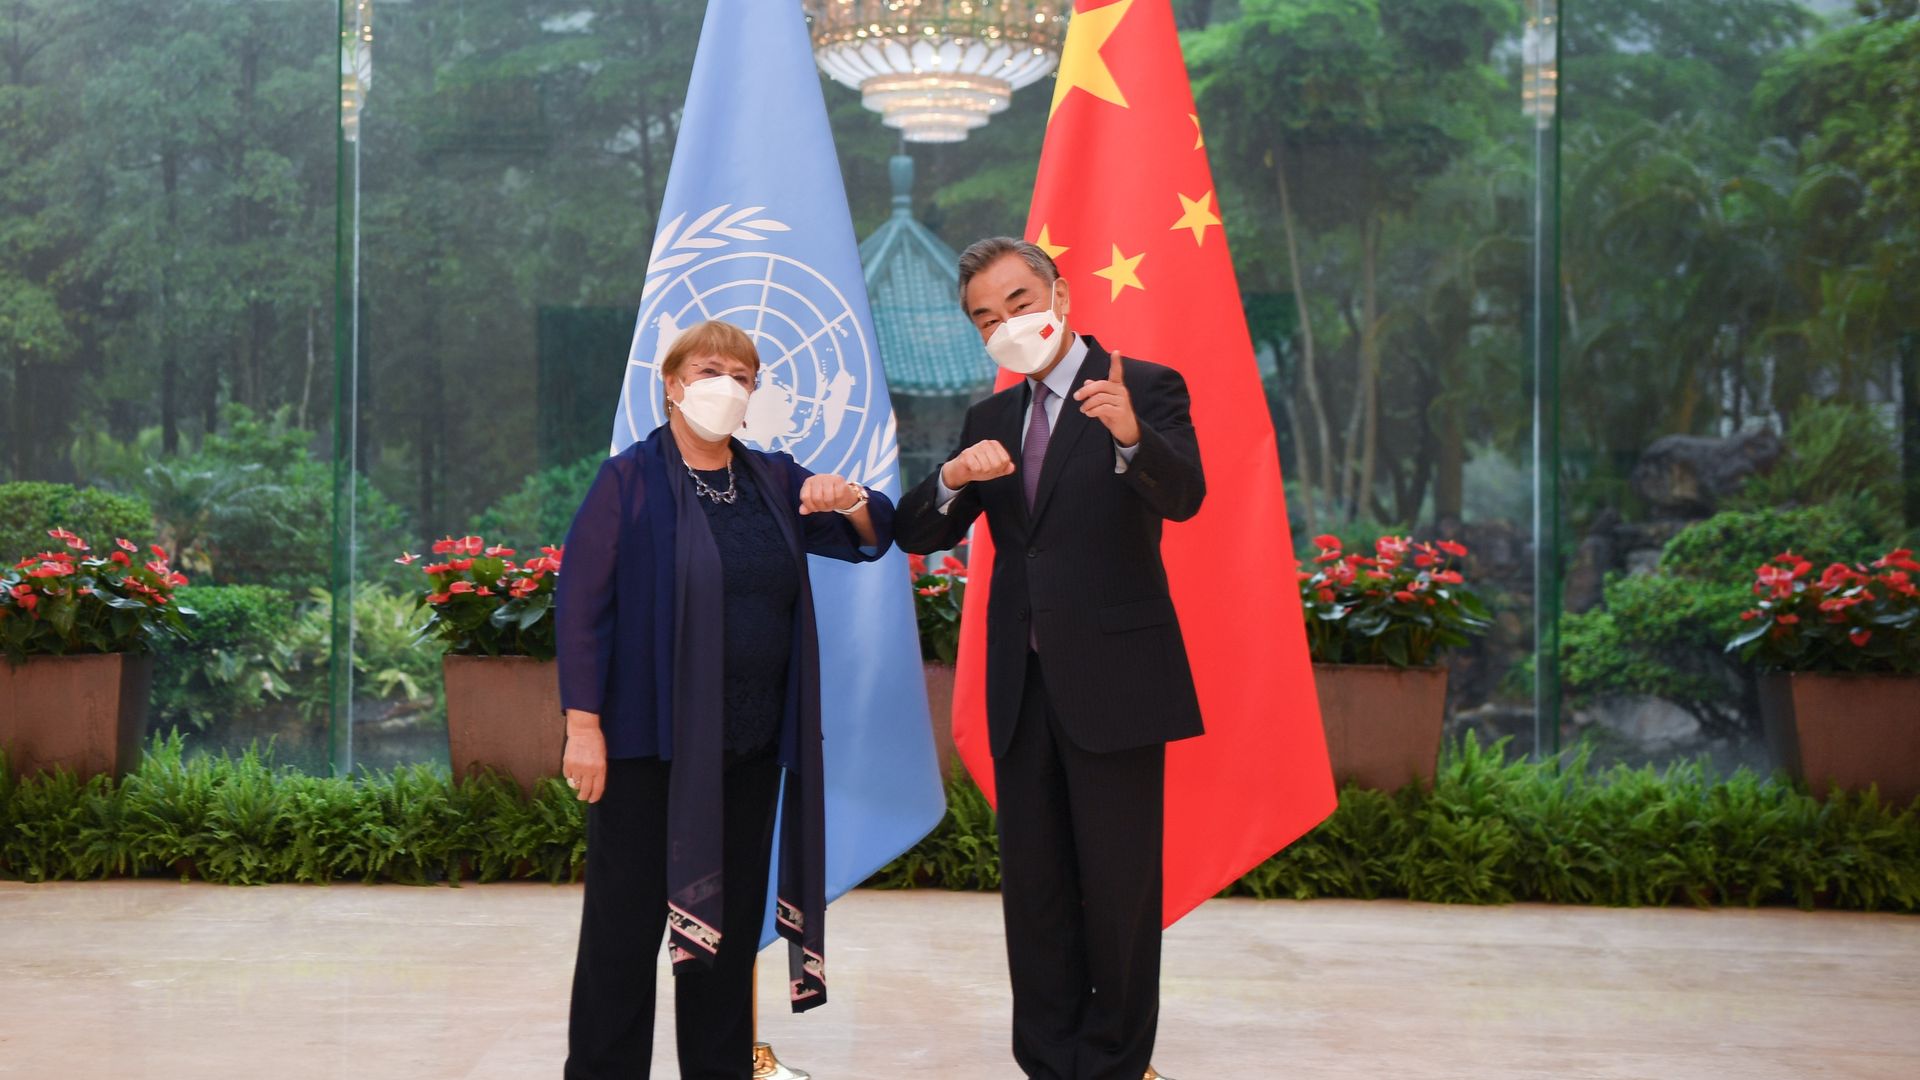 Chinese State Councilor and Foreign Minister Wang Yi meets with the United Nations High Commissioner for Human Rights Michelle Bachelet in Guangzhou